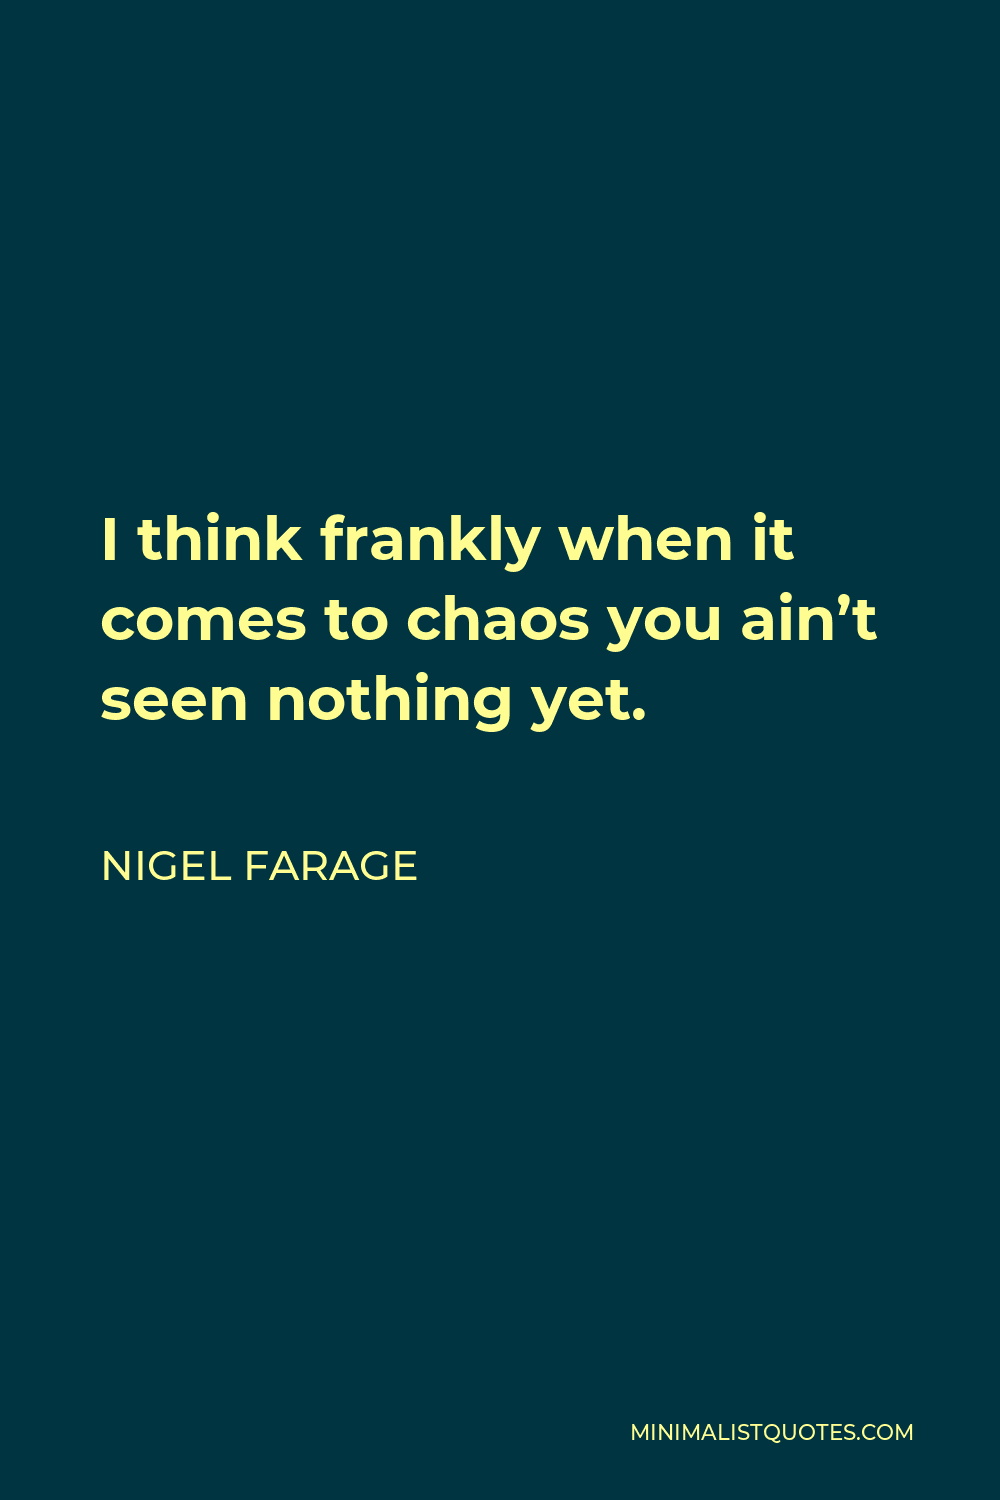 Nigel Farage Quote - I think frankly when it comes to chaos you ain’t seen nothing yet.